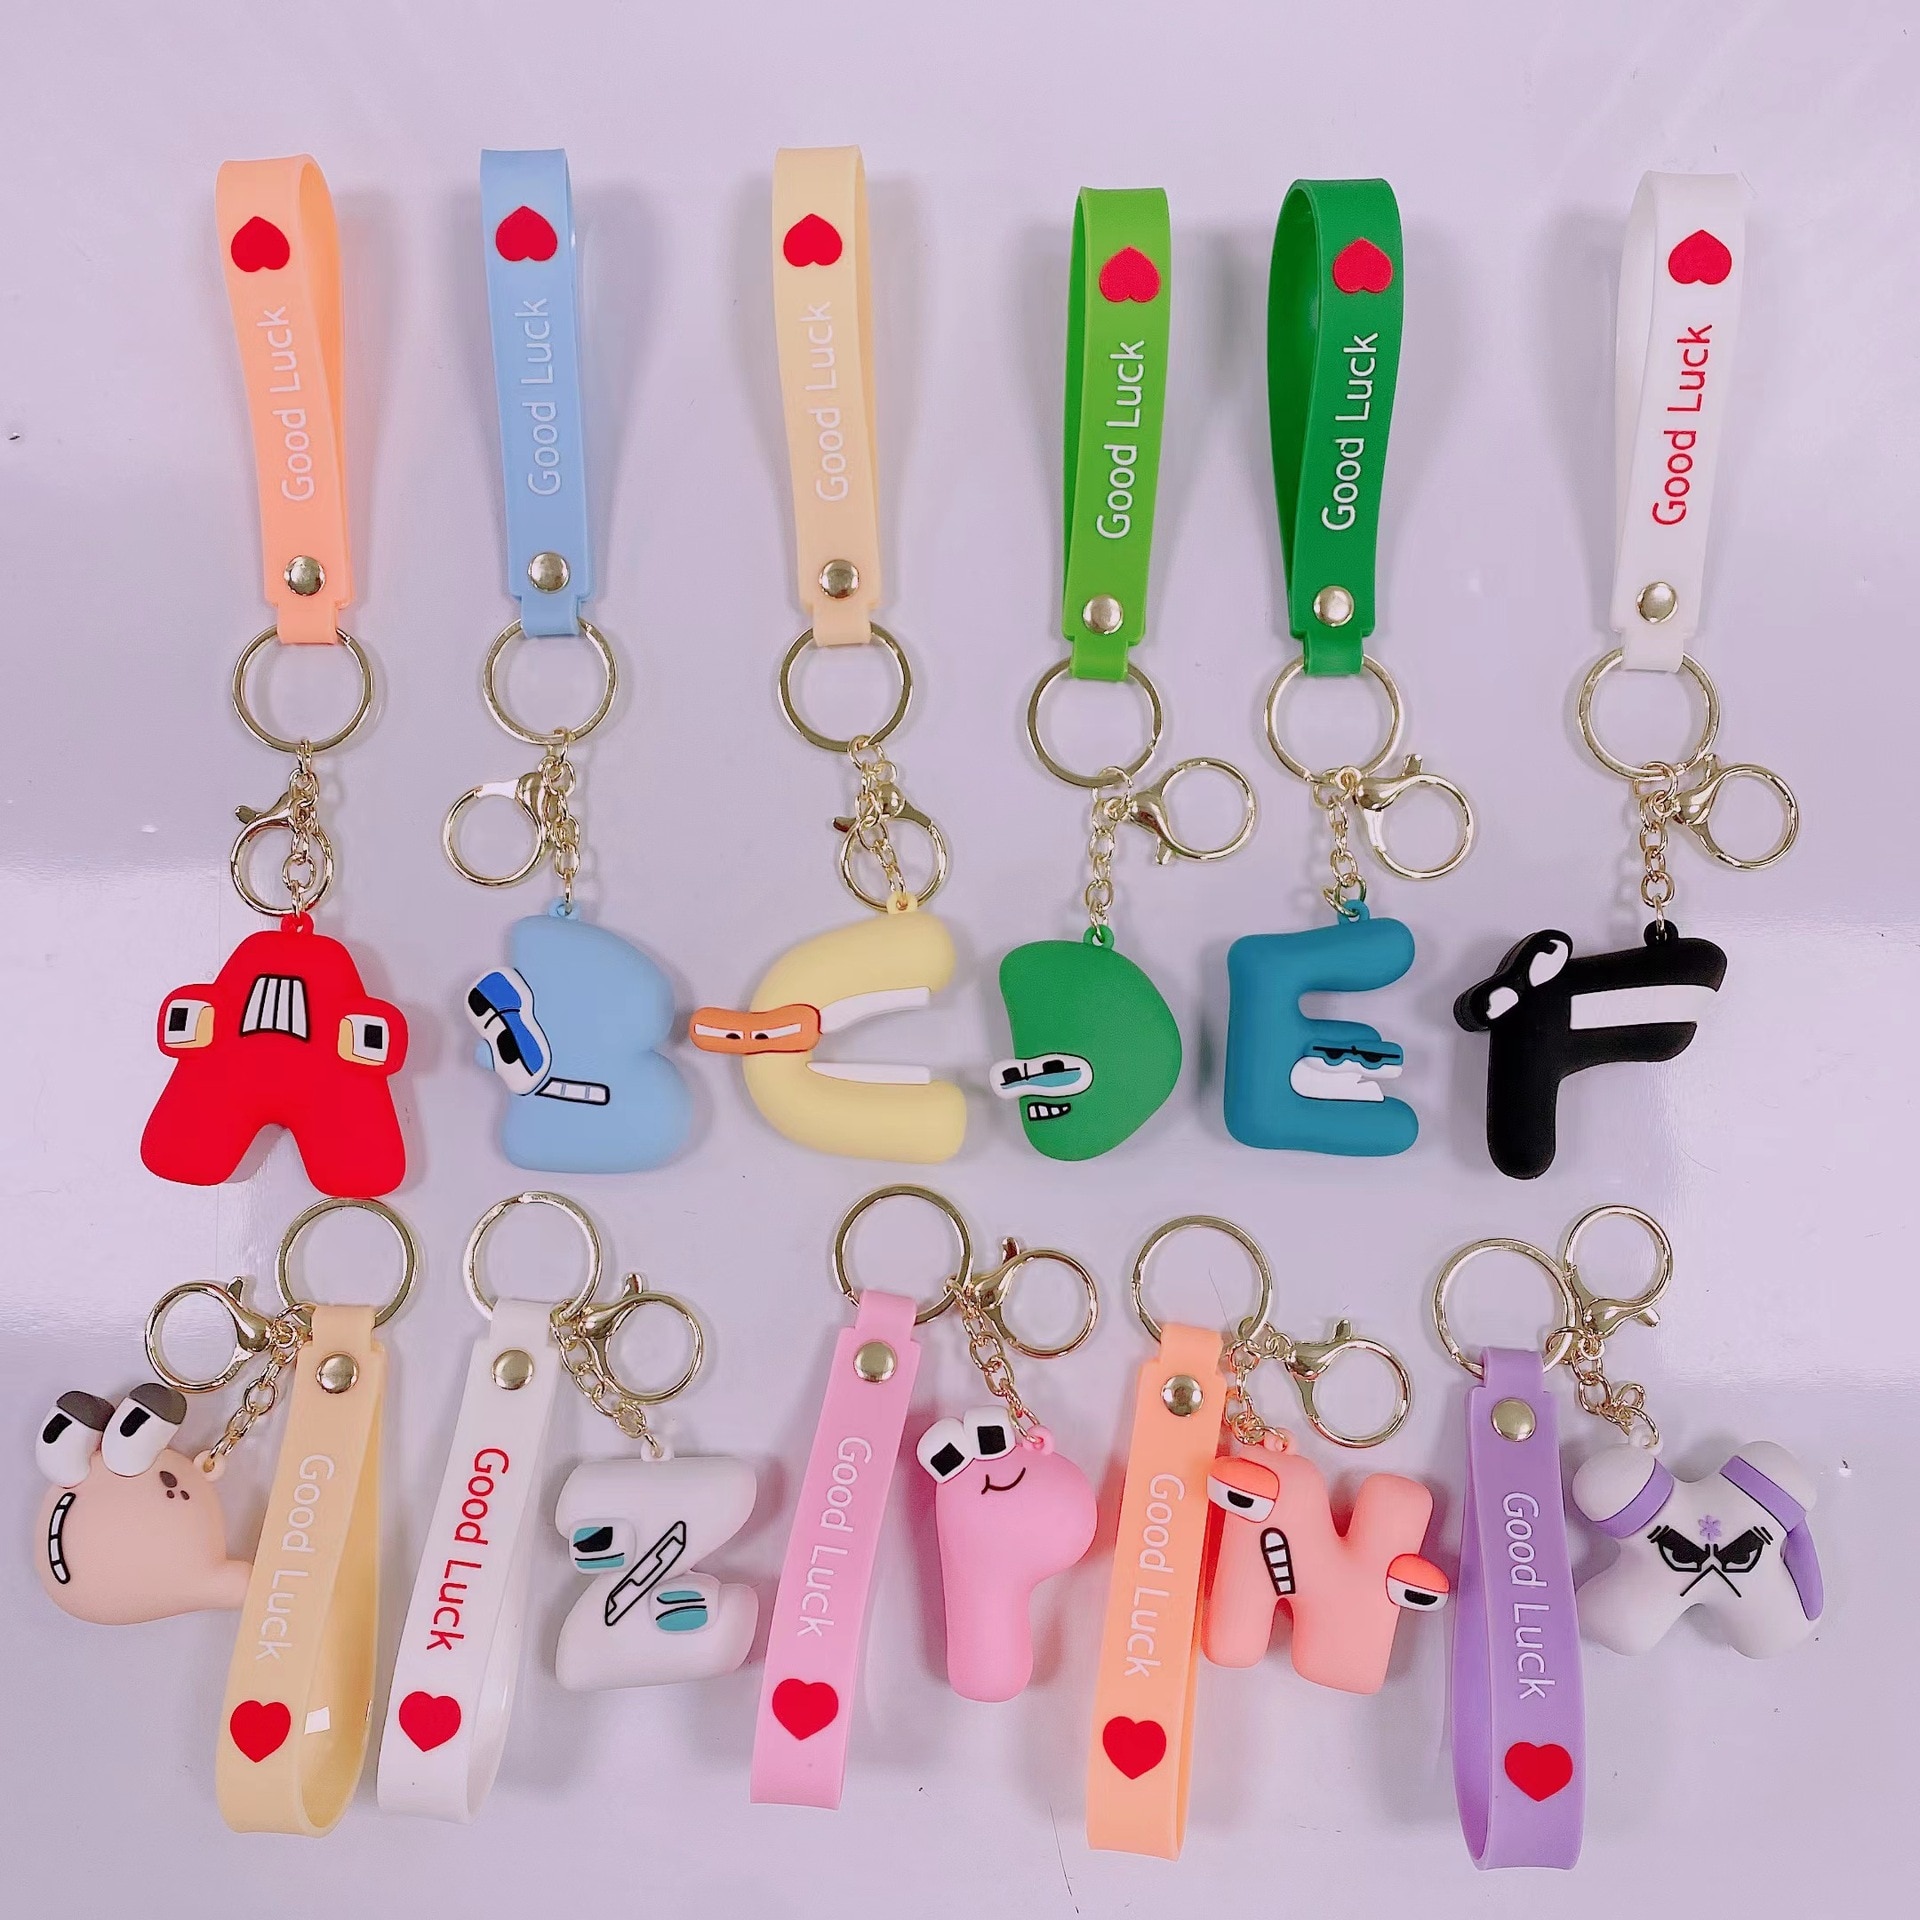 Alphabet Lore Keychain Toys English Letter Animal Doll Toys Gift for Kids Children Educational Alphabet Lore - Alphabet Lore Plush